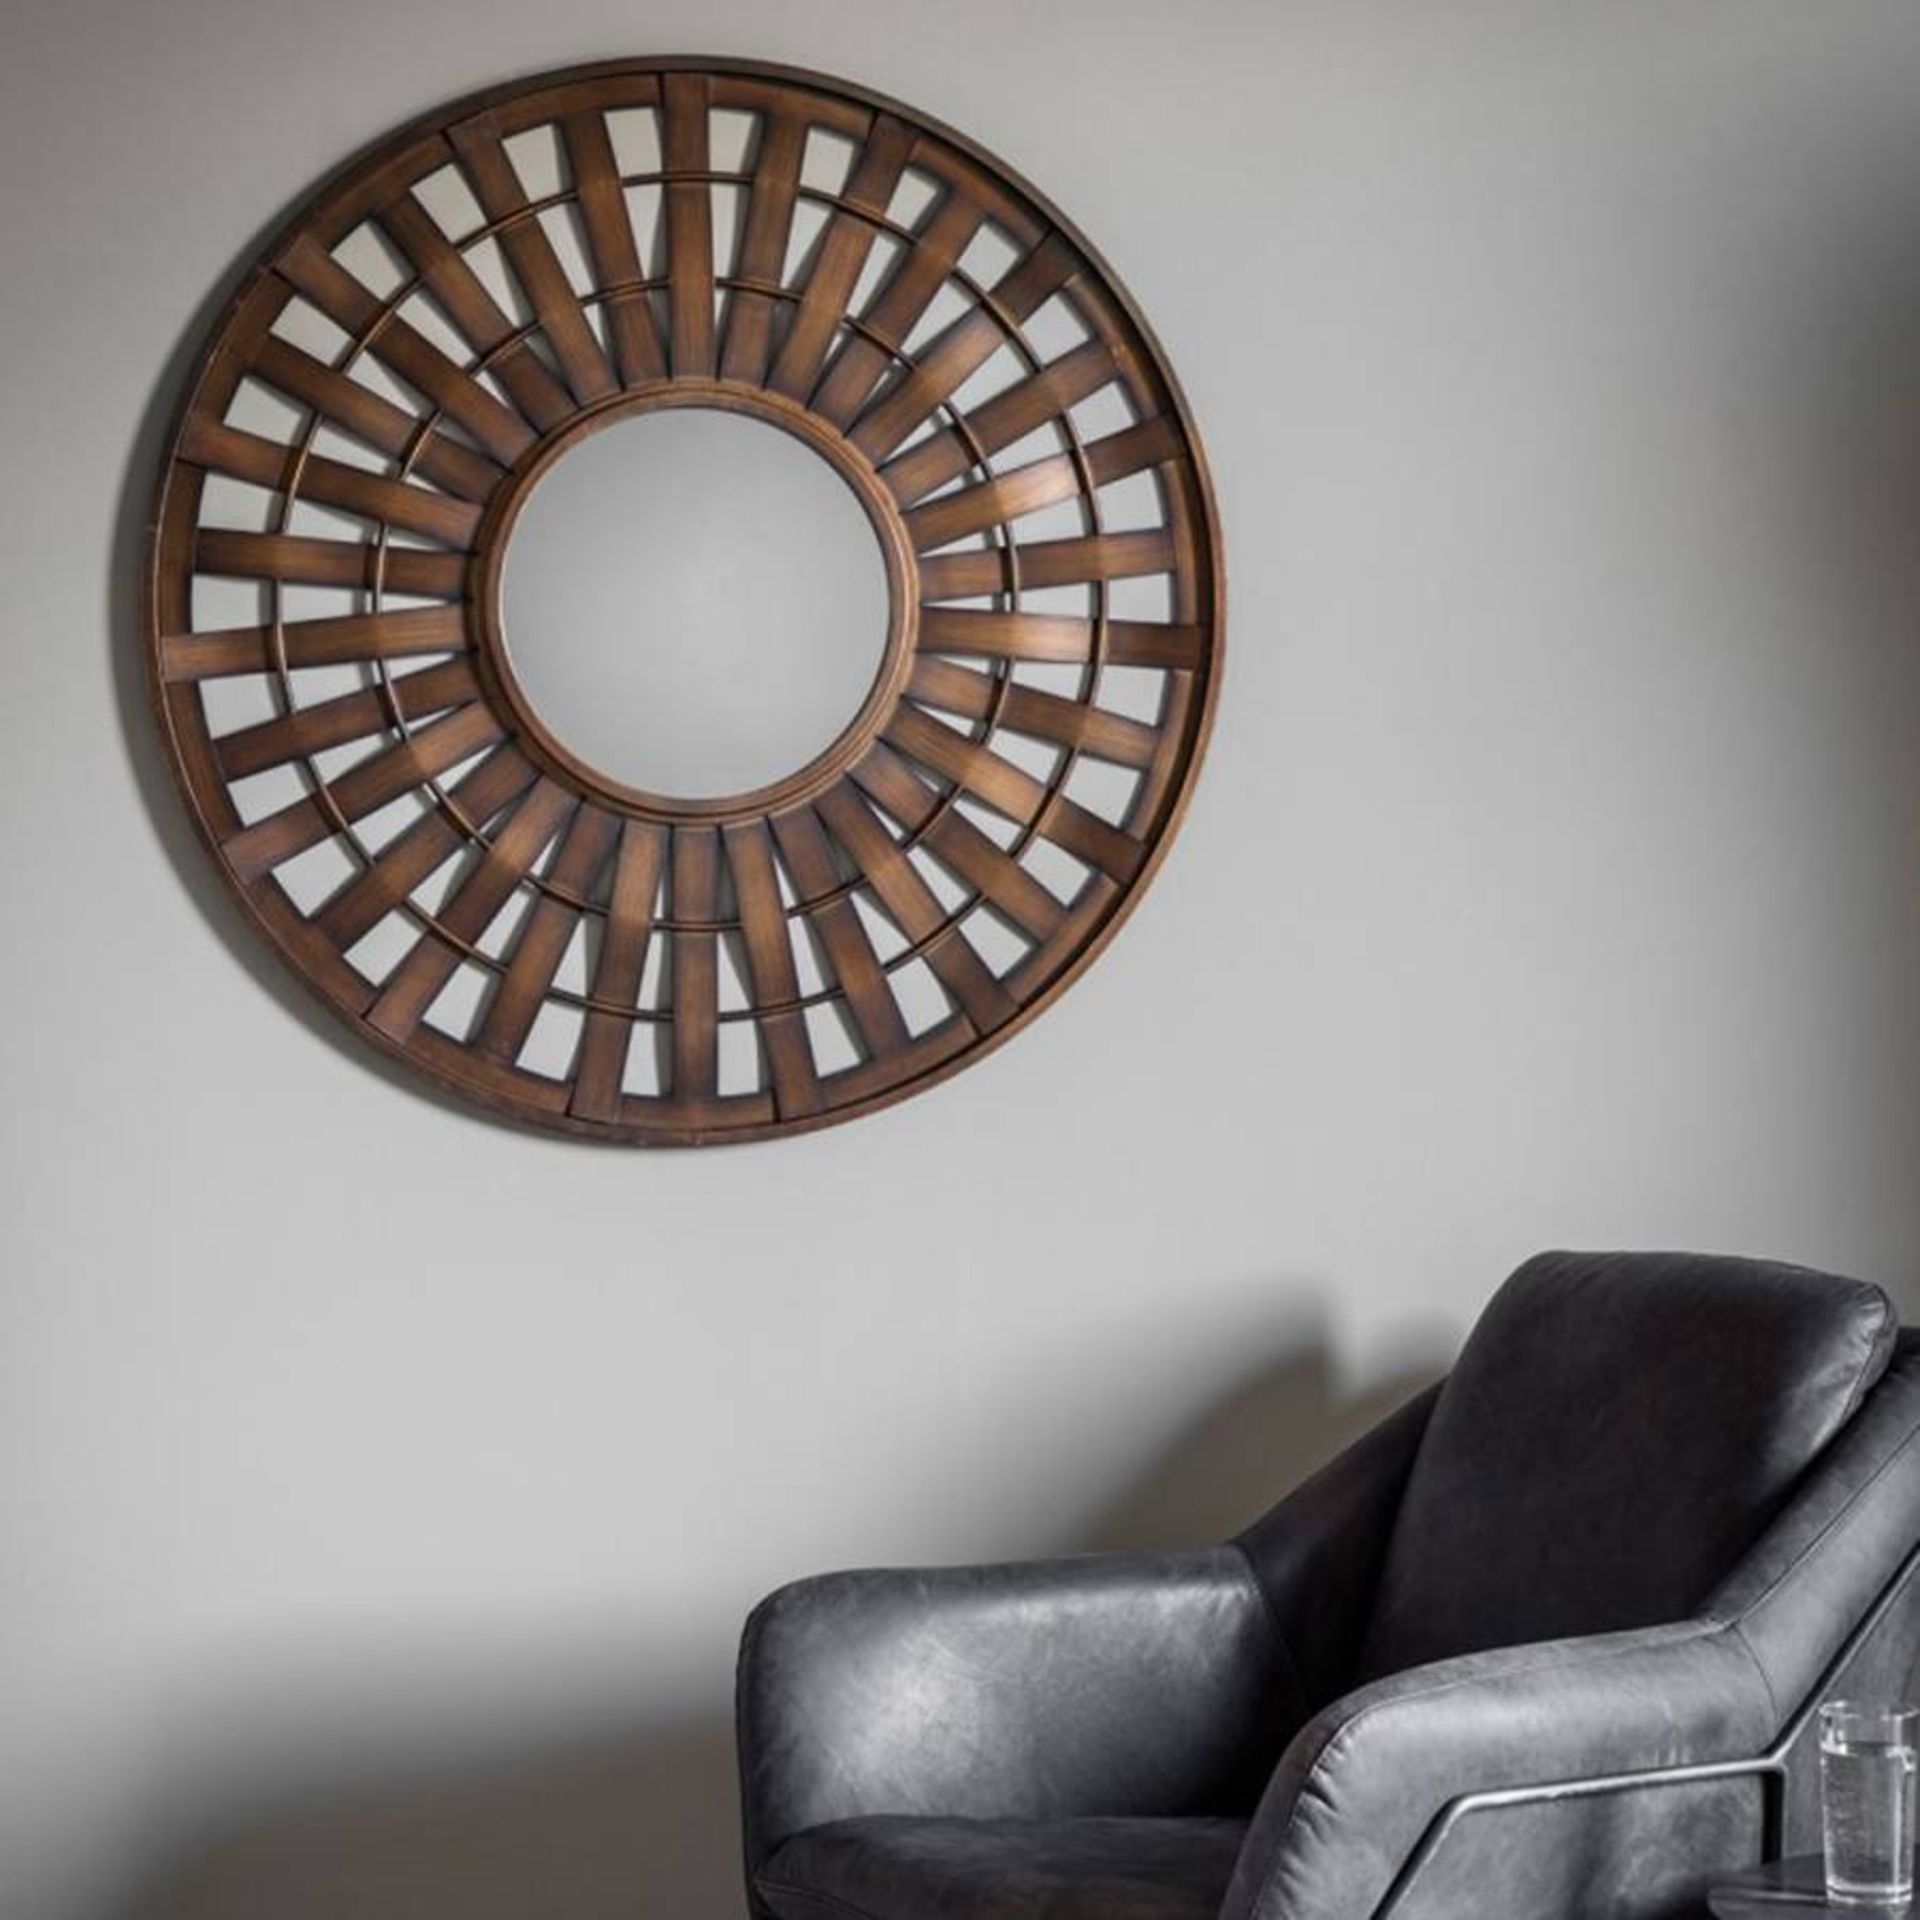 Mitcham Mirror Bronze in colour, this rustic round wall mirror will help finish off the look you